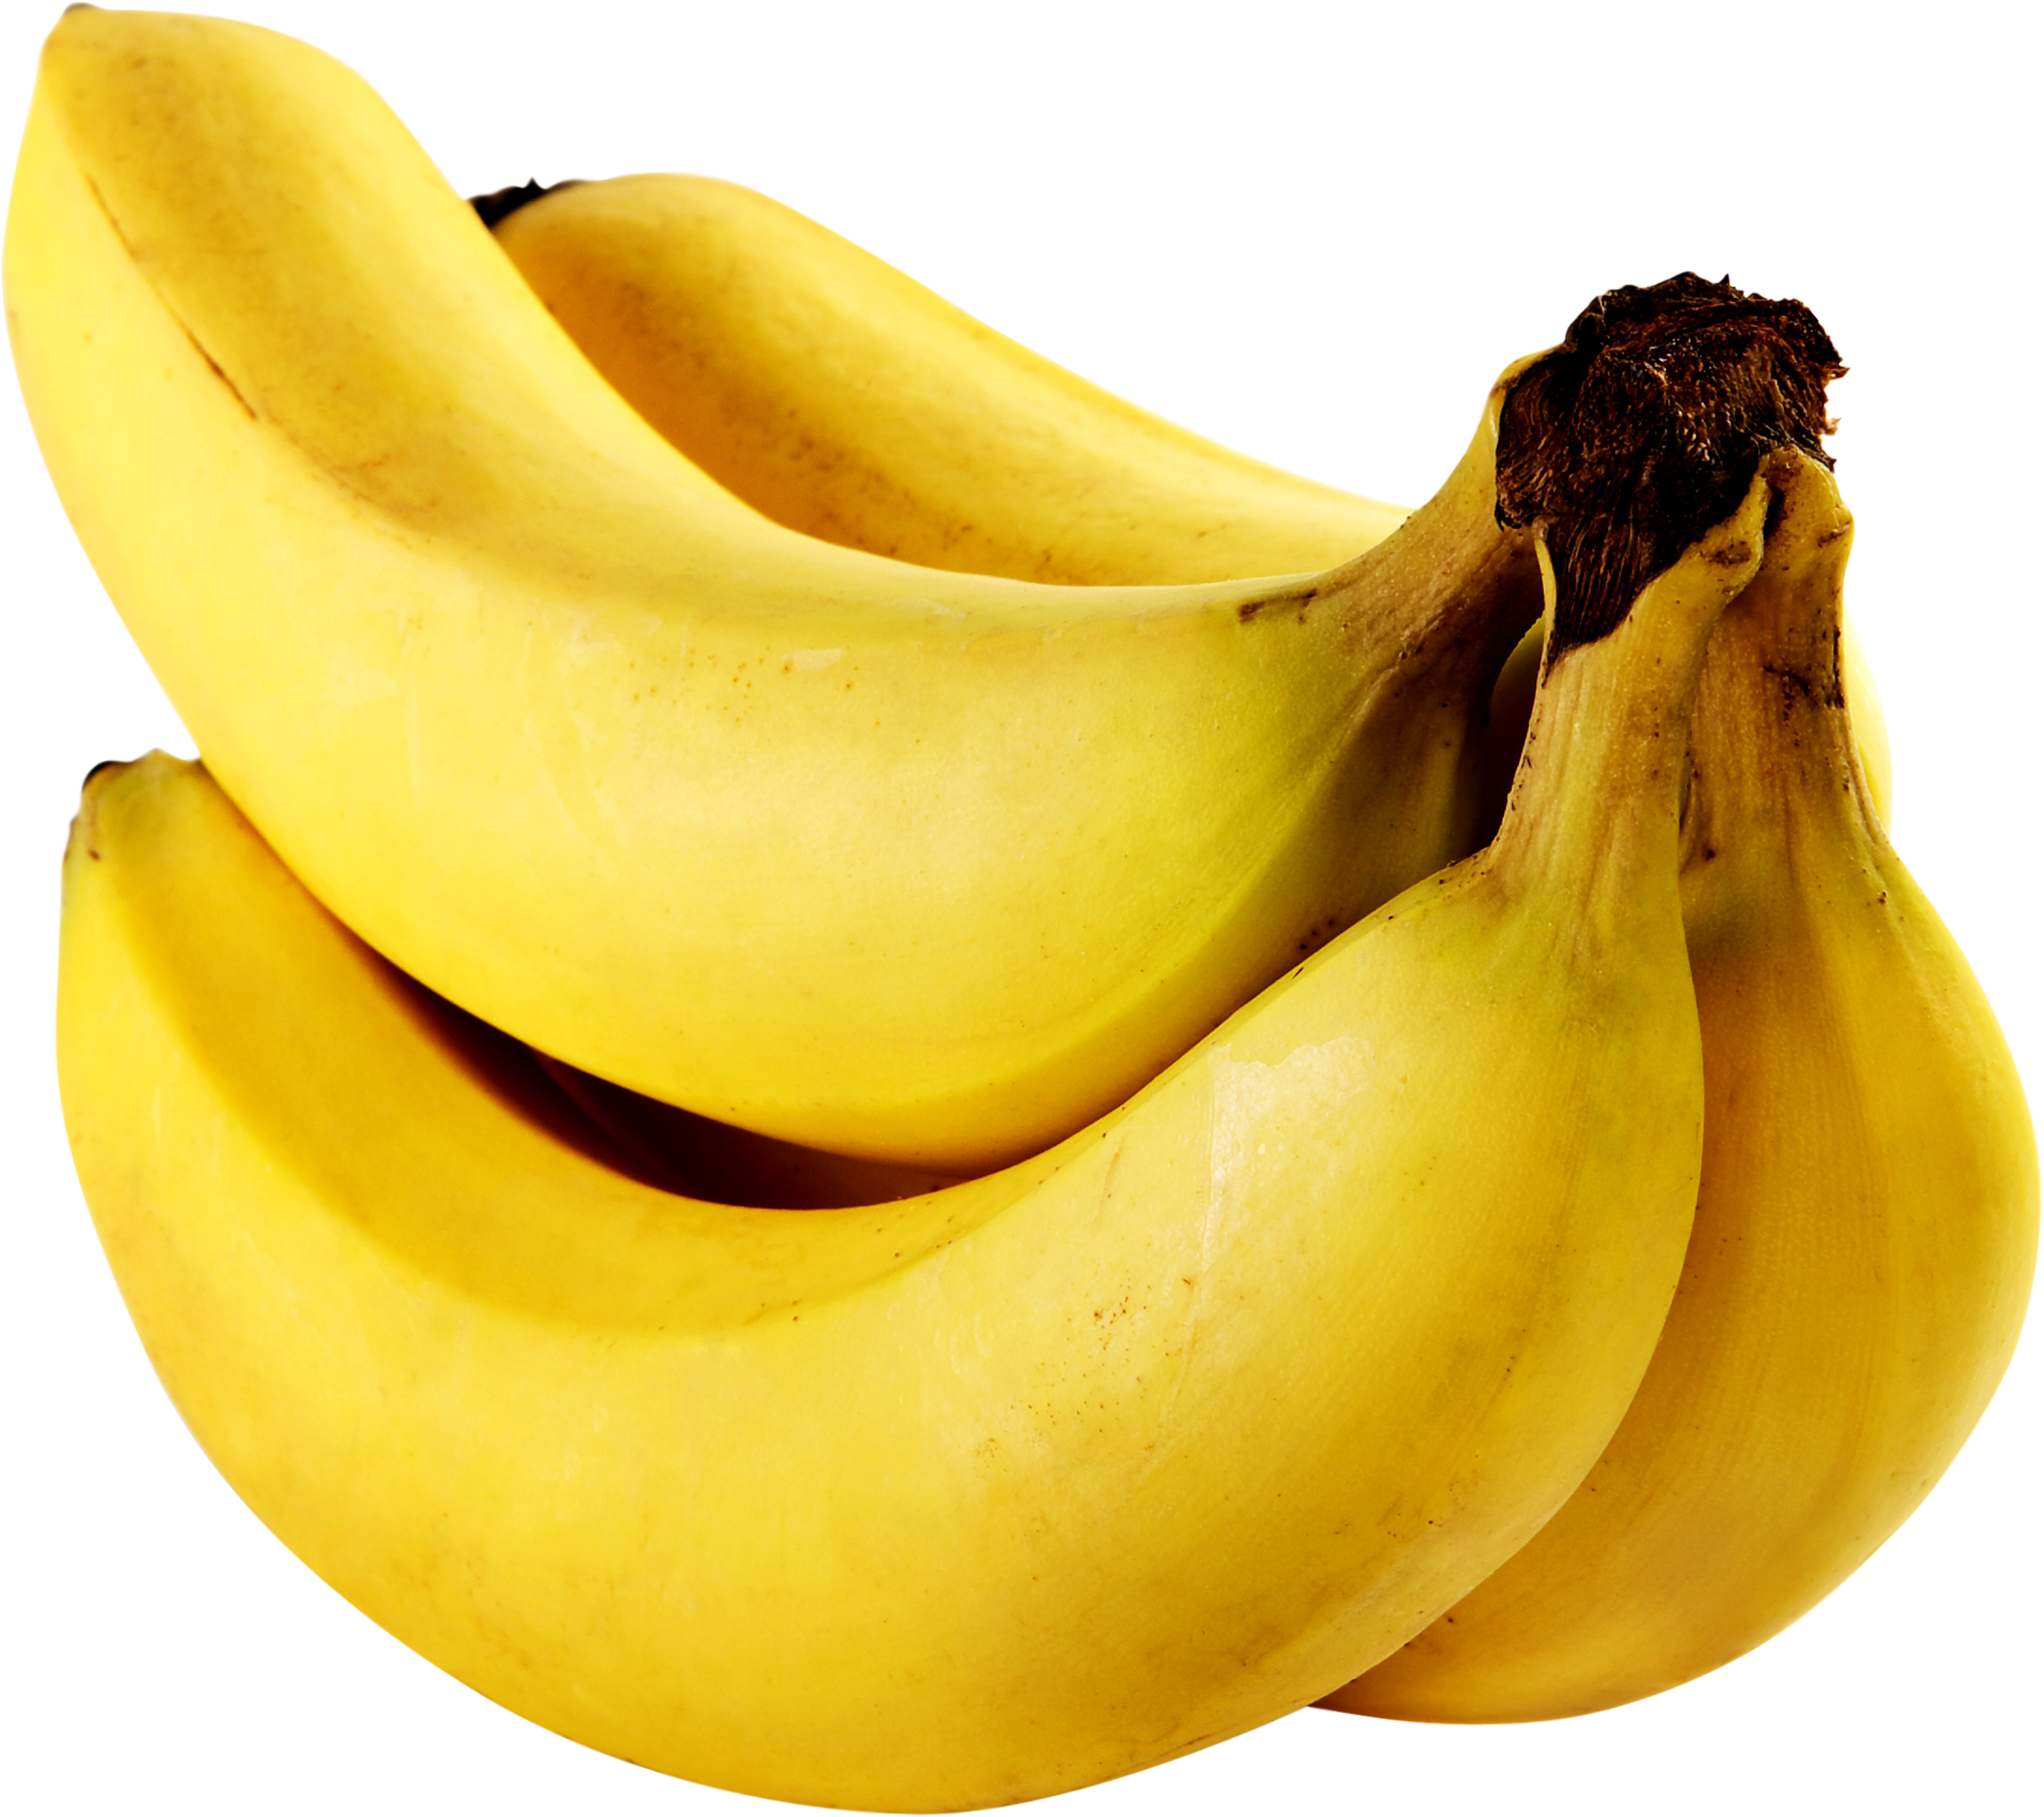 Png image free picture. Zucchini clipart banana